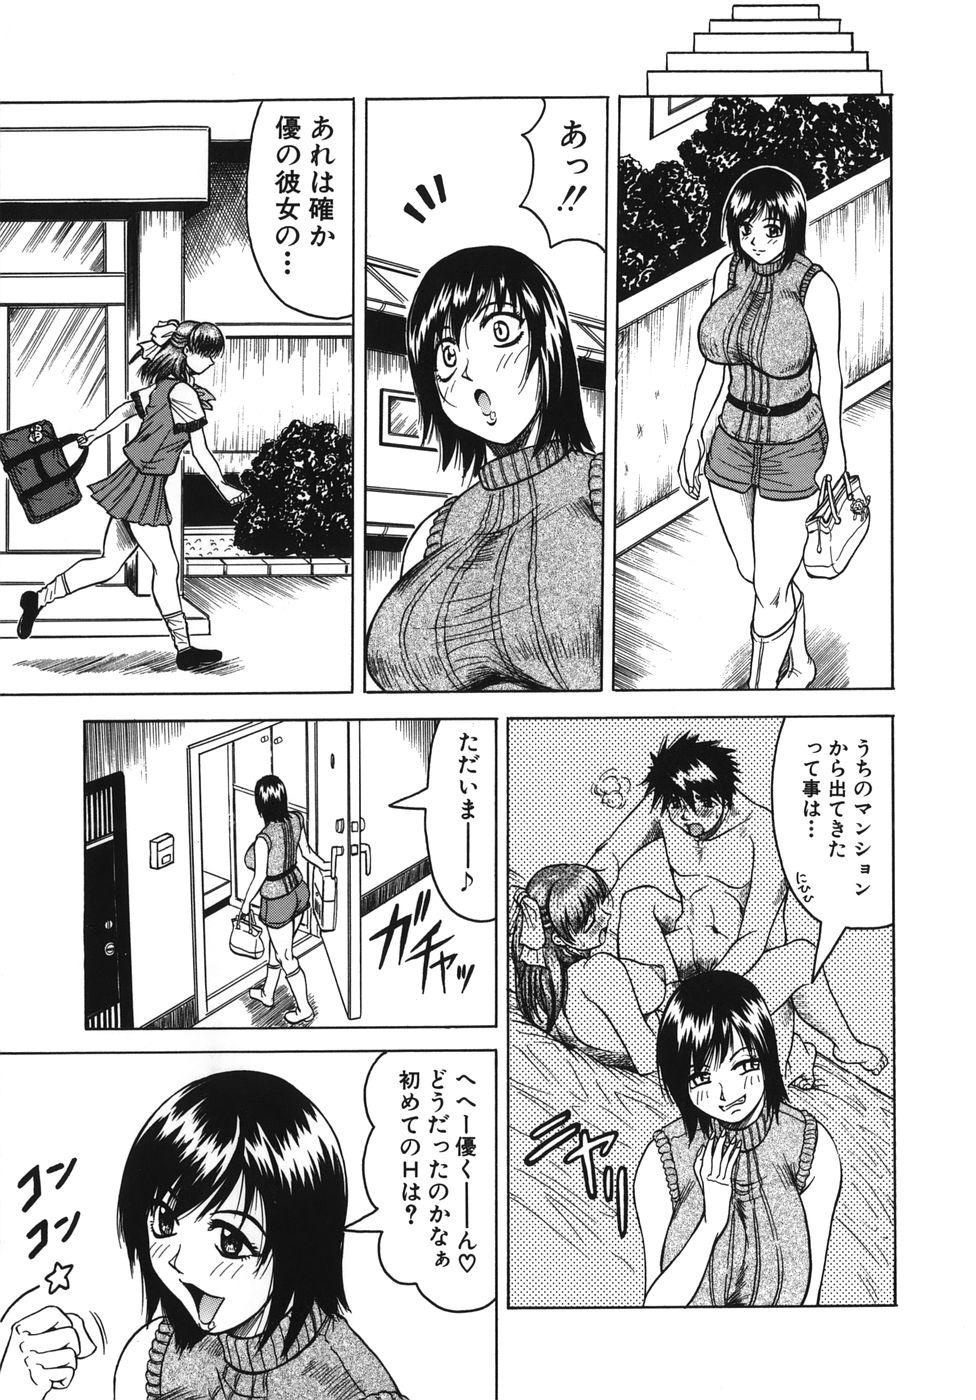 Amazing [Jamming] Onee-chan ni Omakase - Leave to Your Elder Sister Hardon - Page 11